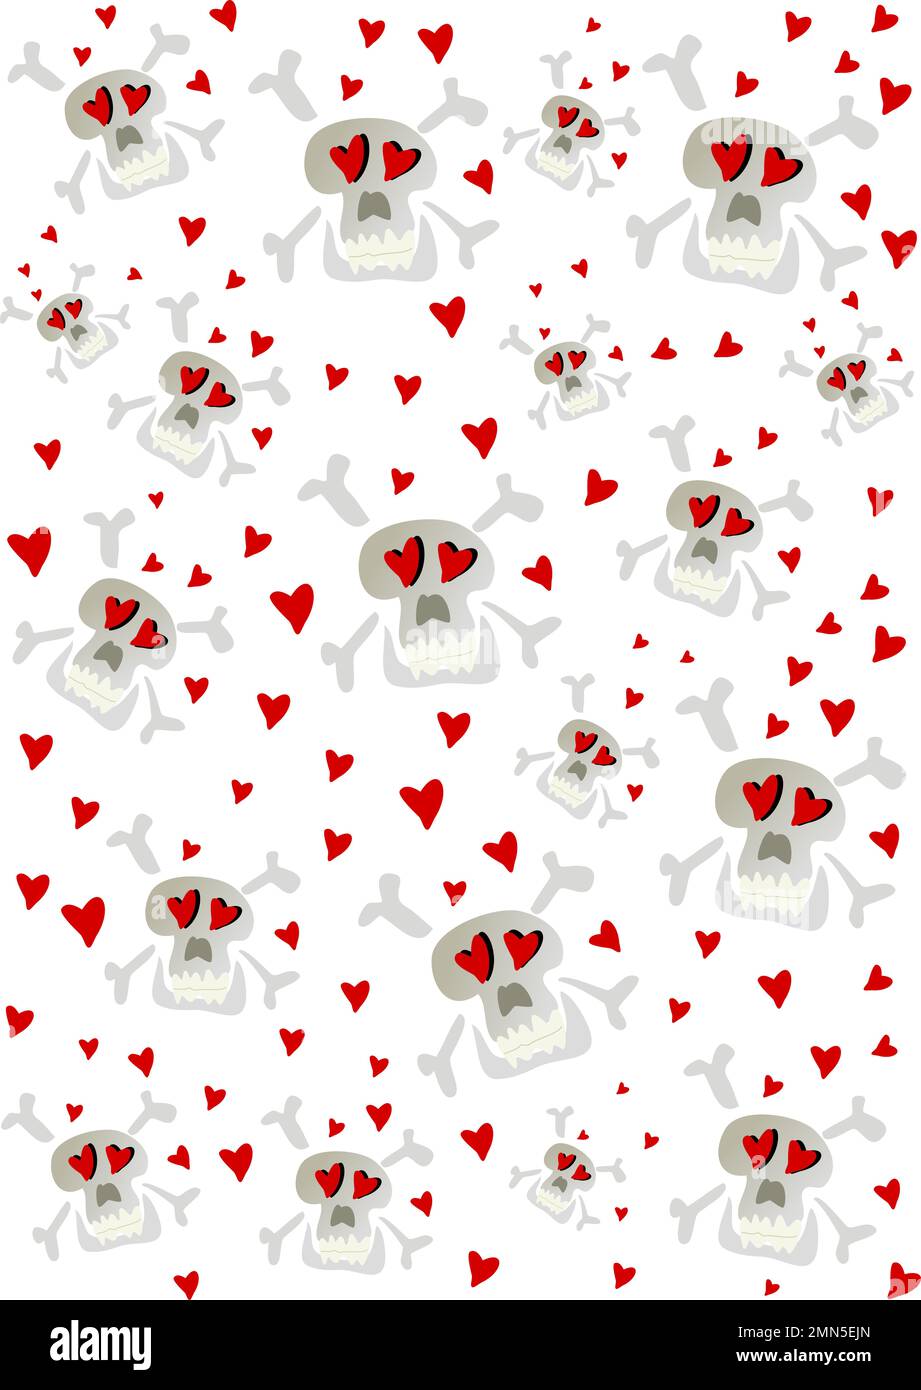 Skulls pattern with flying hearts Stock Photo